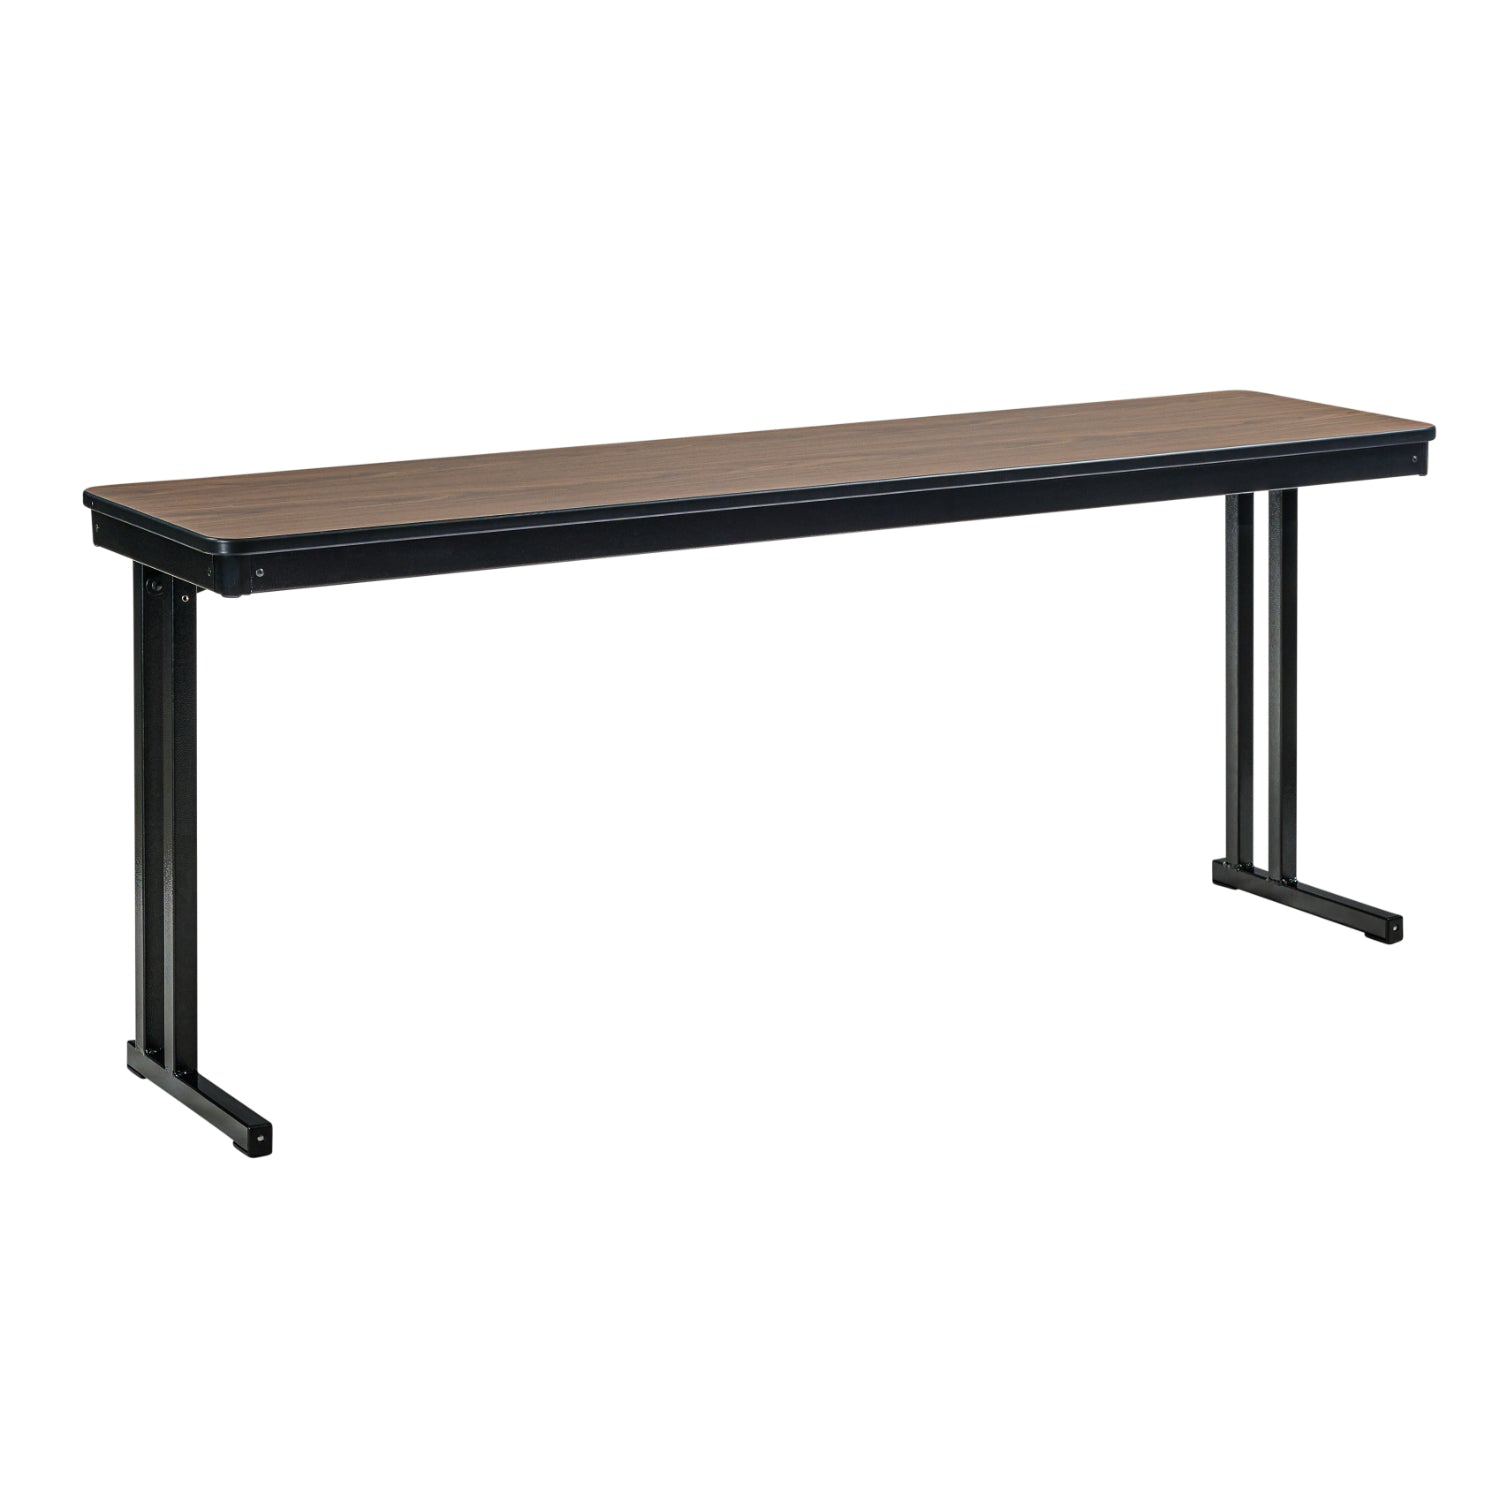 Max Seating Folding Training and Seminar Table with Cantilever Legs, 18" x 48", High Pressure Laminate Top with Particleboard Core/T-Mold Edge